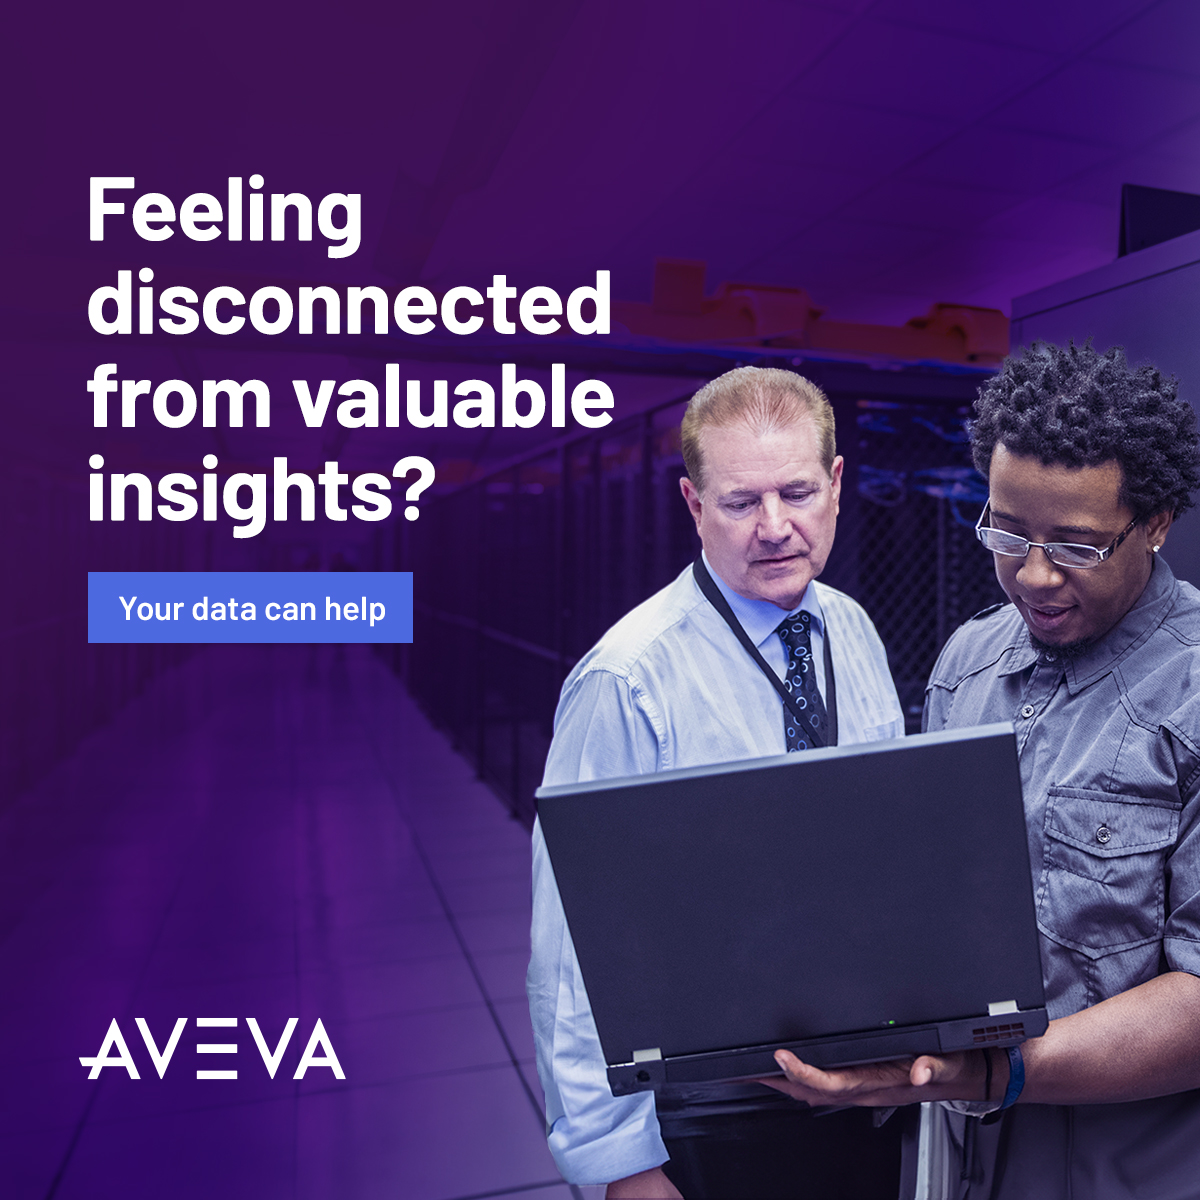 Bridge the gaps in your industrial 🏭 ecosystem and gain a 360° view of your #operations for faster, smarter business decisions.

Learn more about AVEVA Connect’s new features and advanced data services . Read the blog ➡️ bit.ly/3Spjrna #cloud #datasharing #AVEVAConnect